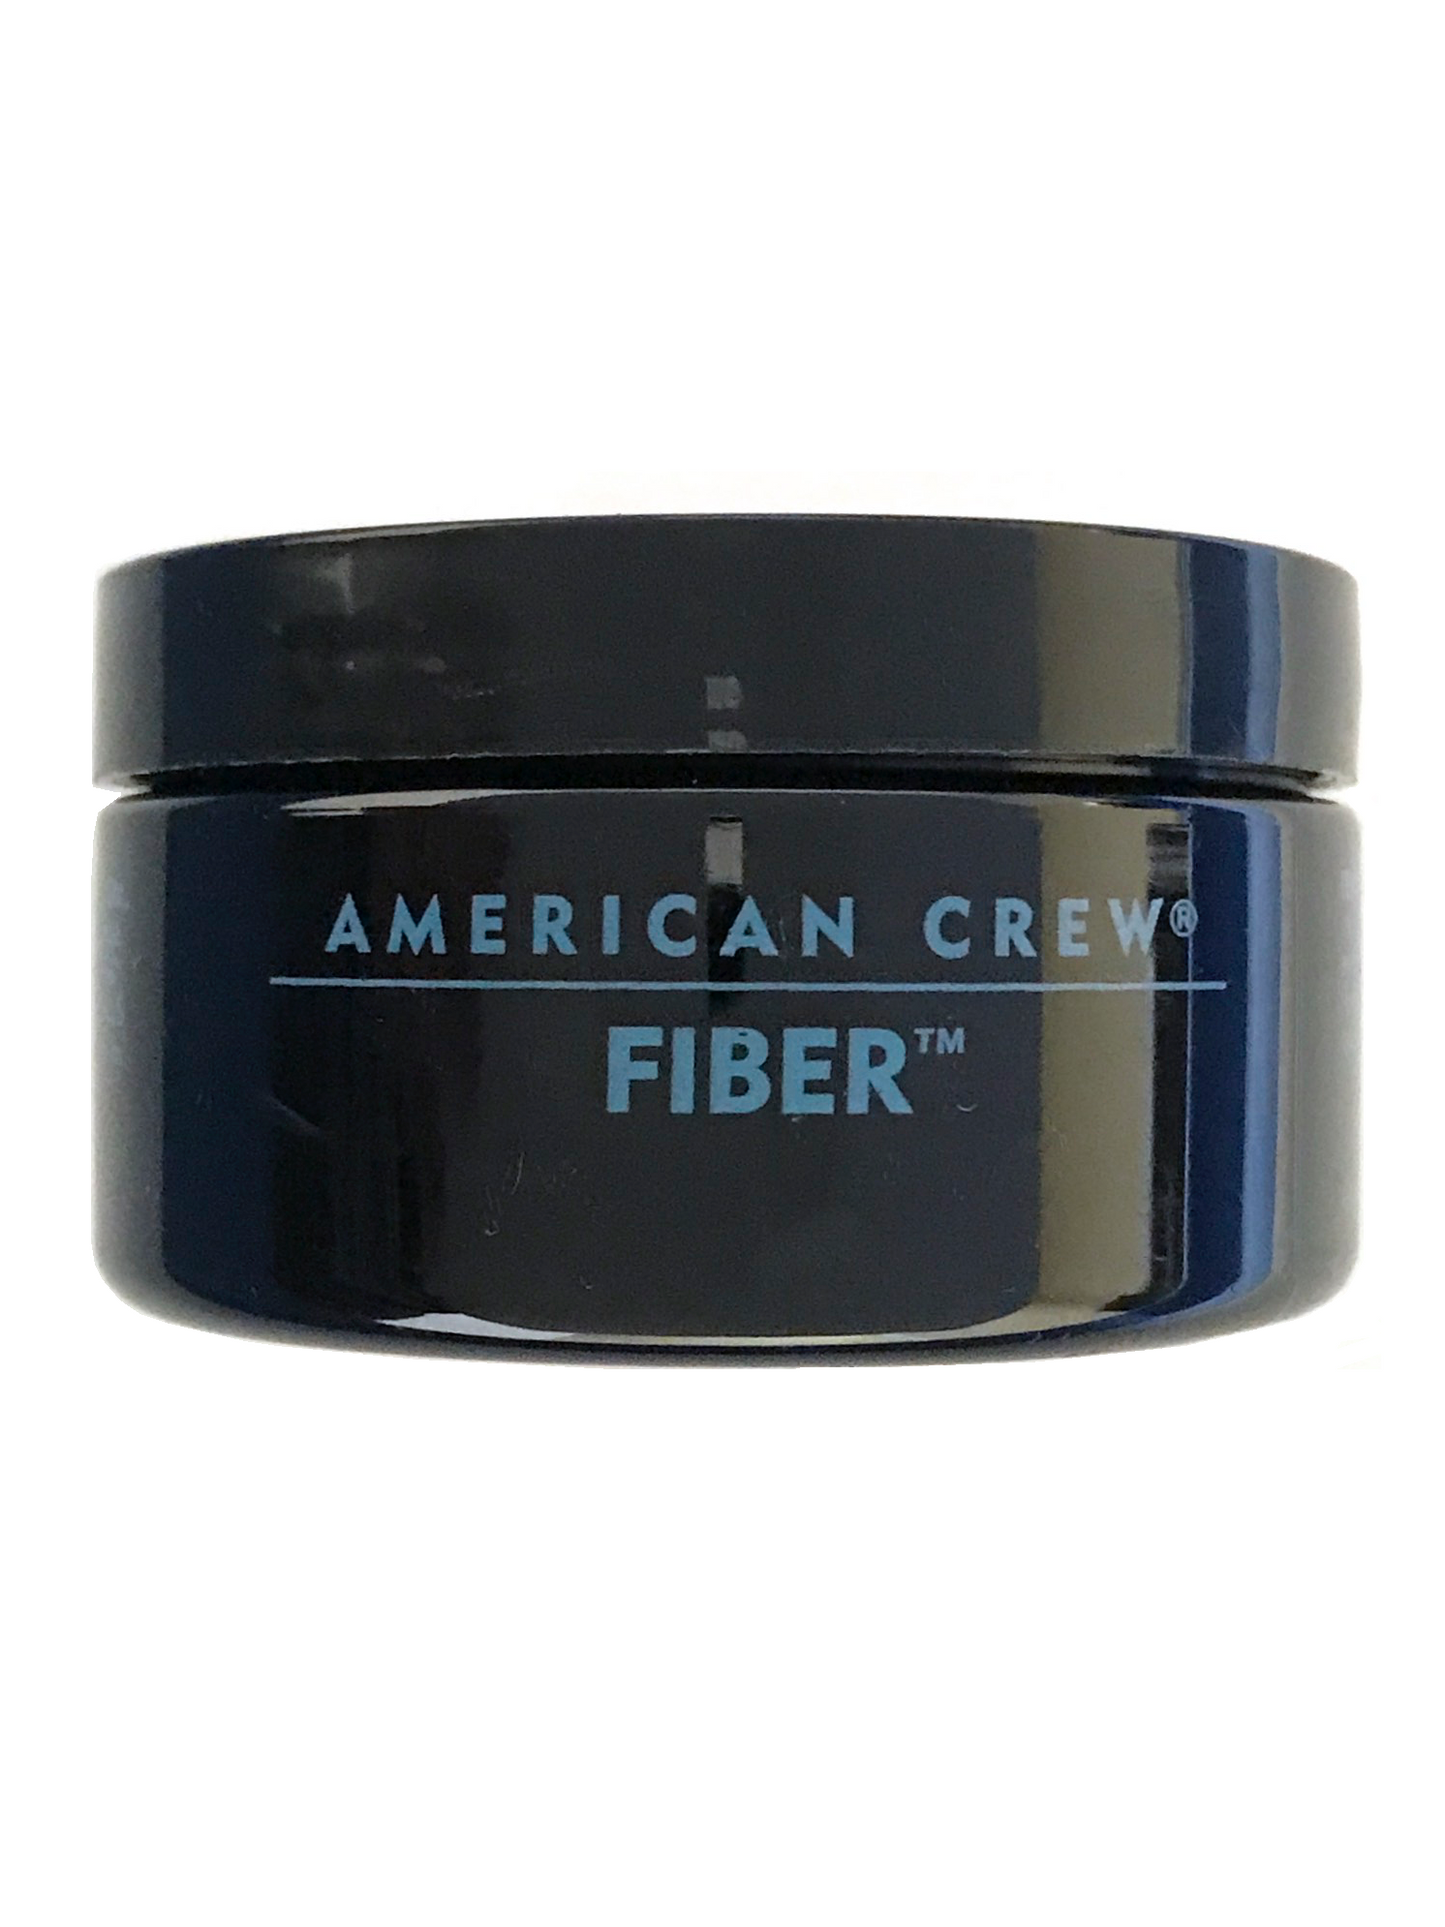 American Crew Fiber 1.75 Oz, Provides Texture With Added Thickness And A Matte Finish